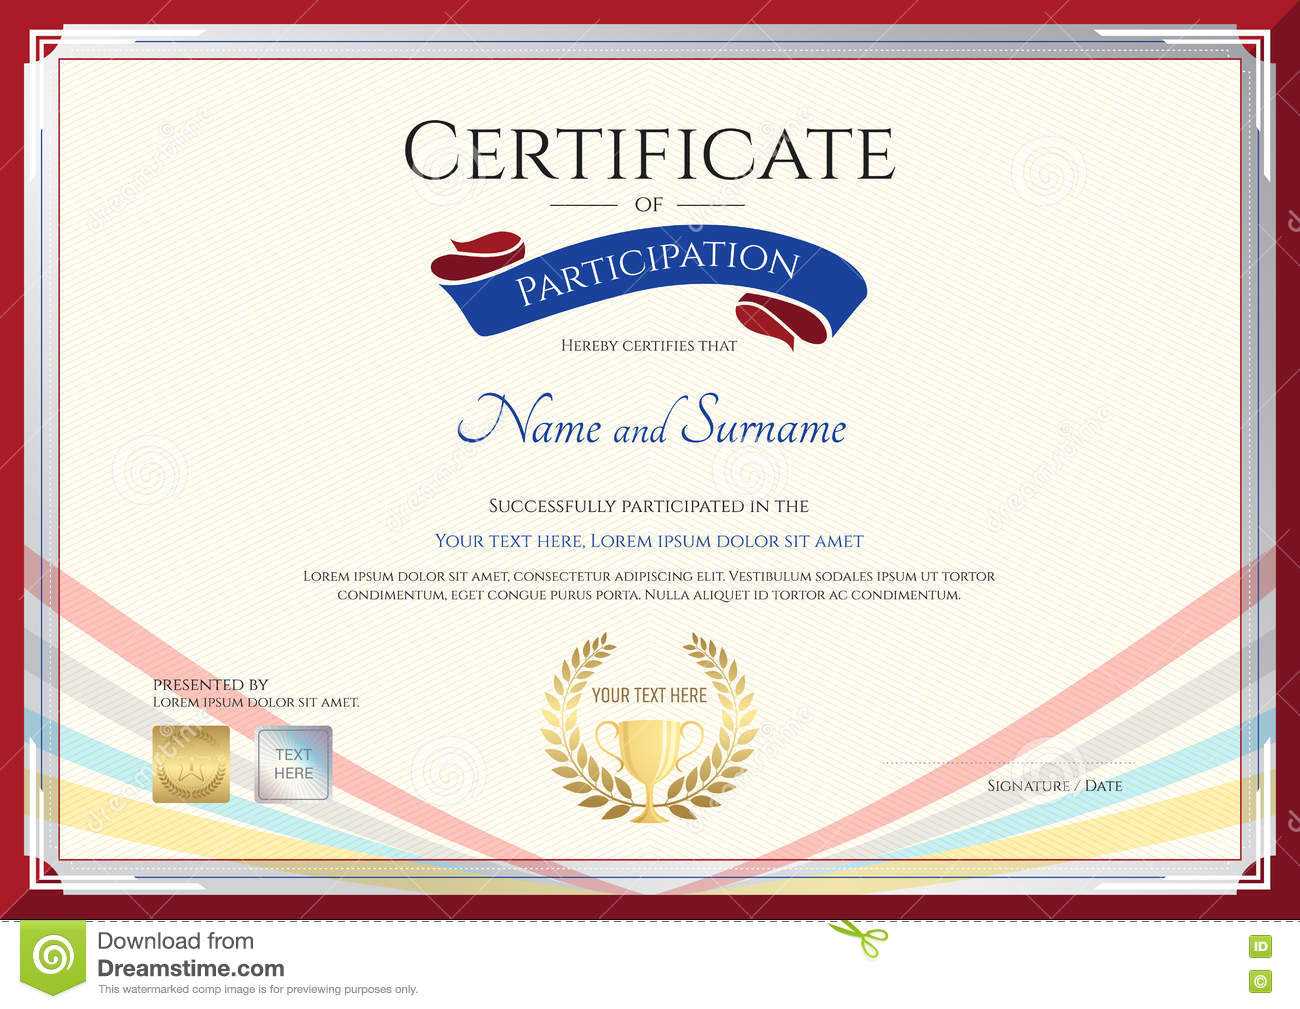 Certificate Template For Achievement, Appreciation Or With International Conference Certificate Templates